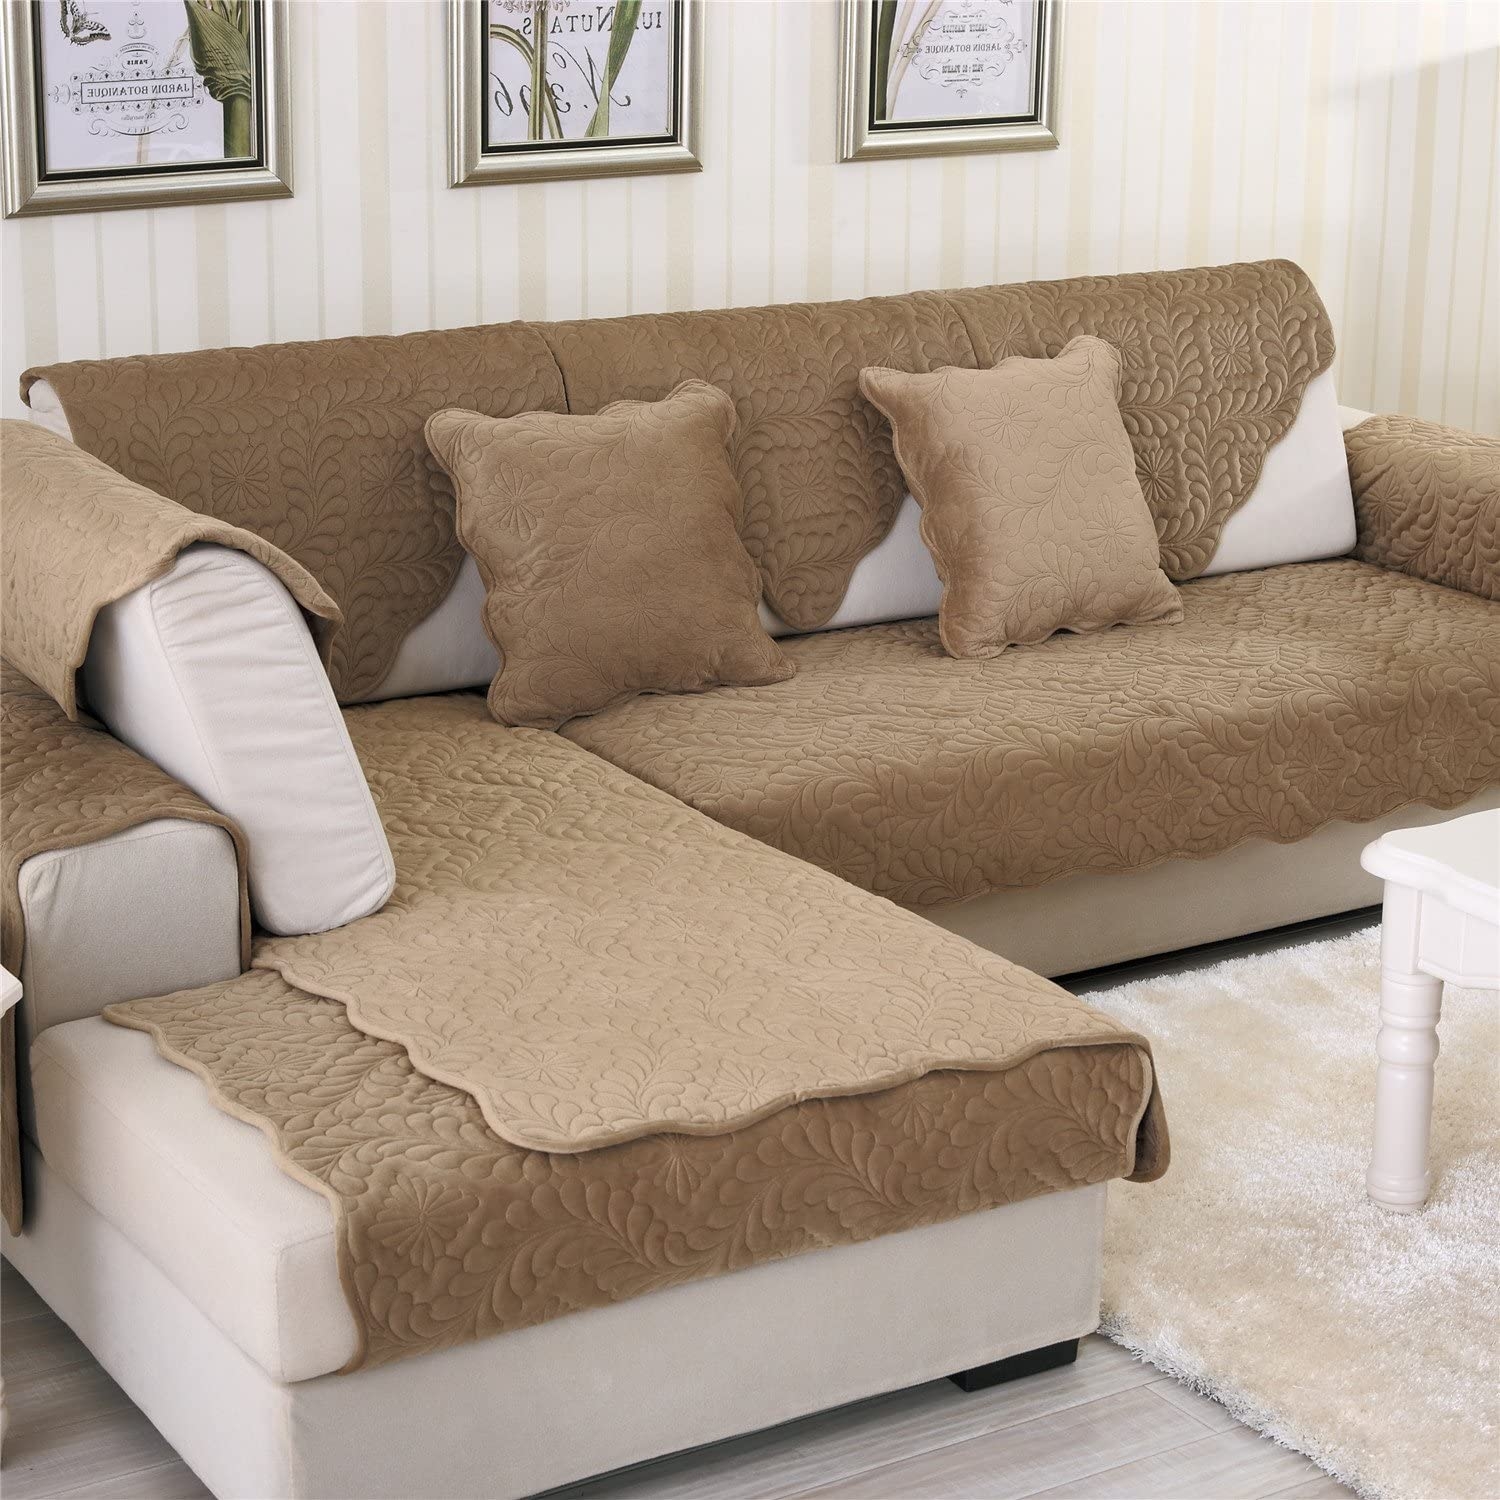 Slip Covers For Sectionals Visualhunt, Couch Covers For Leather Sectional